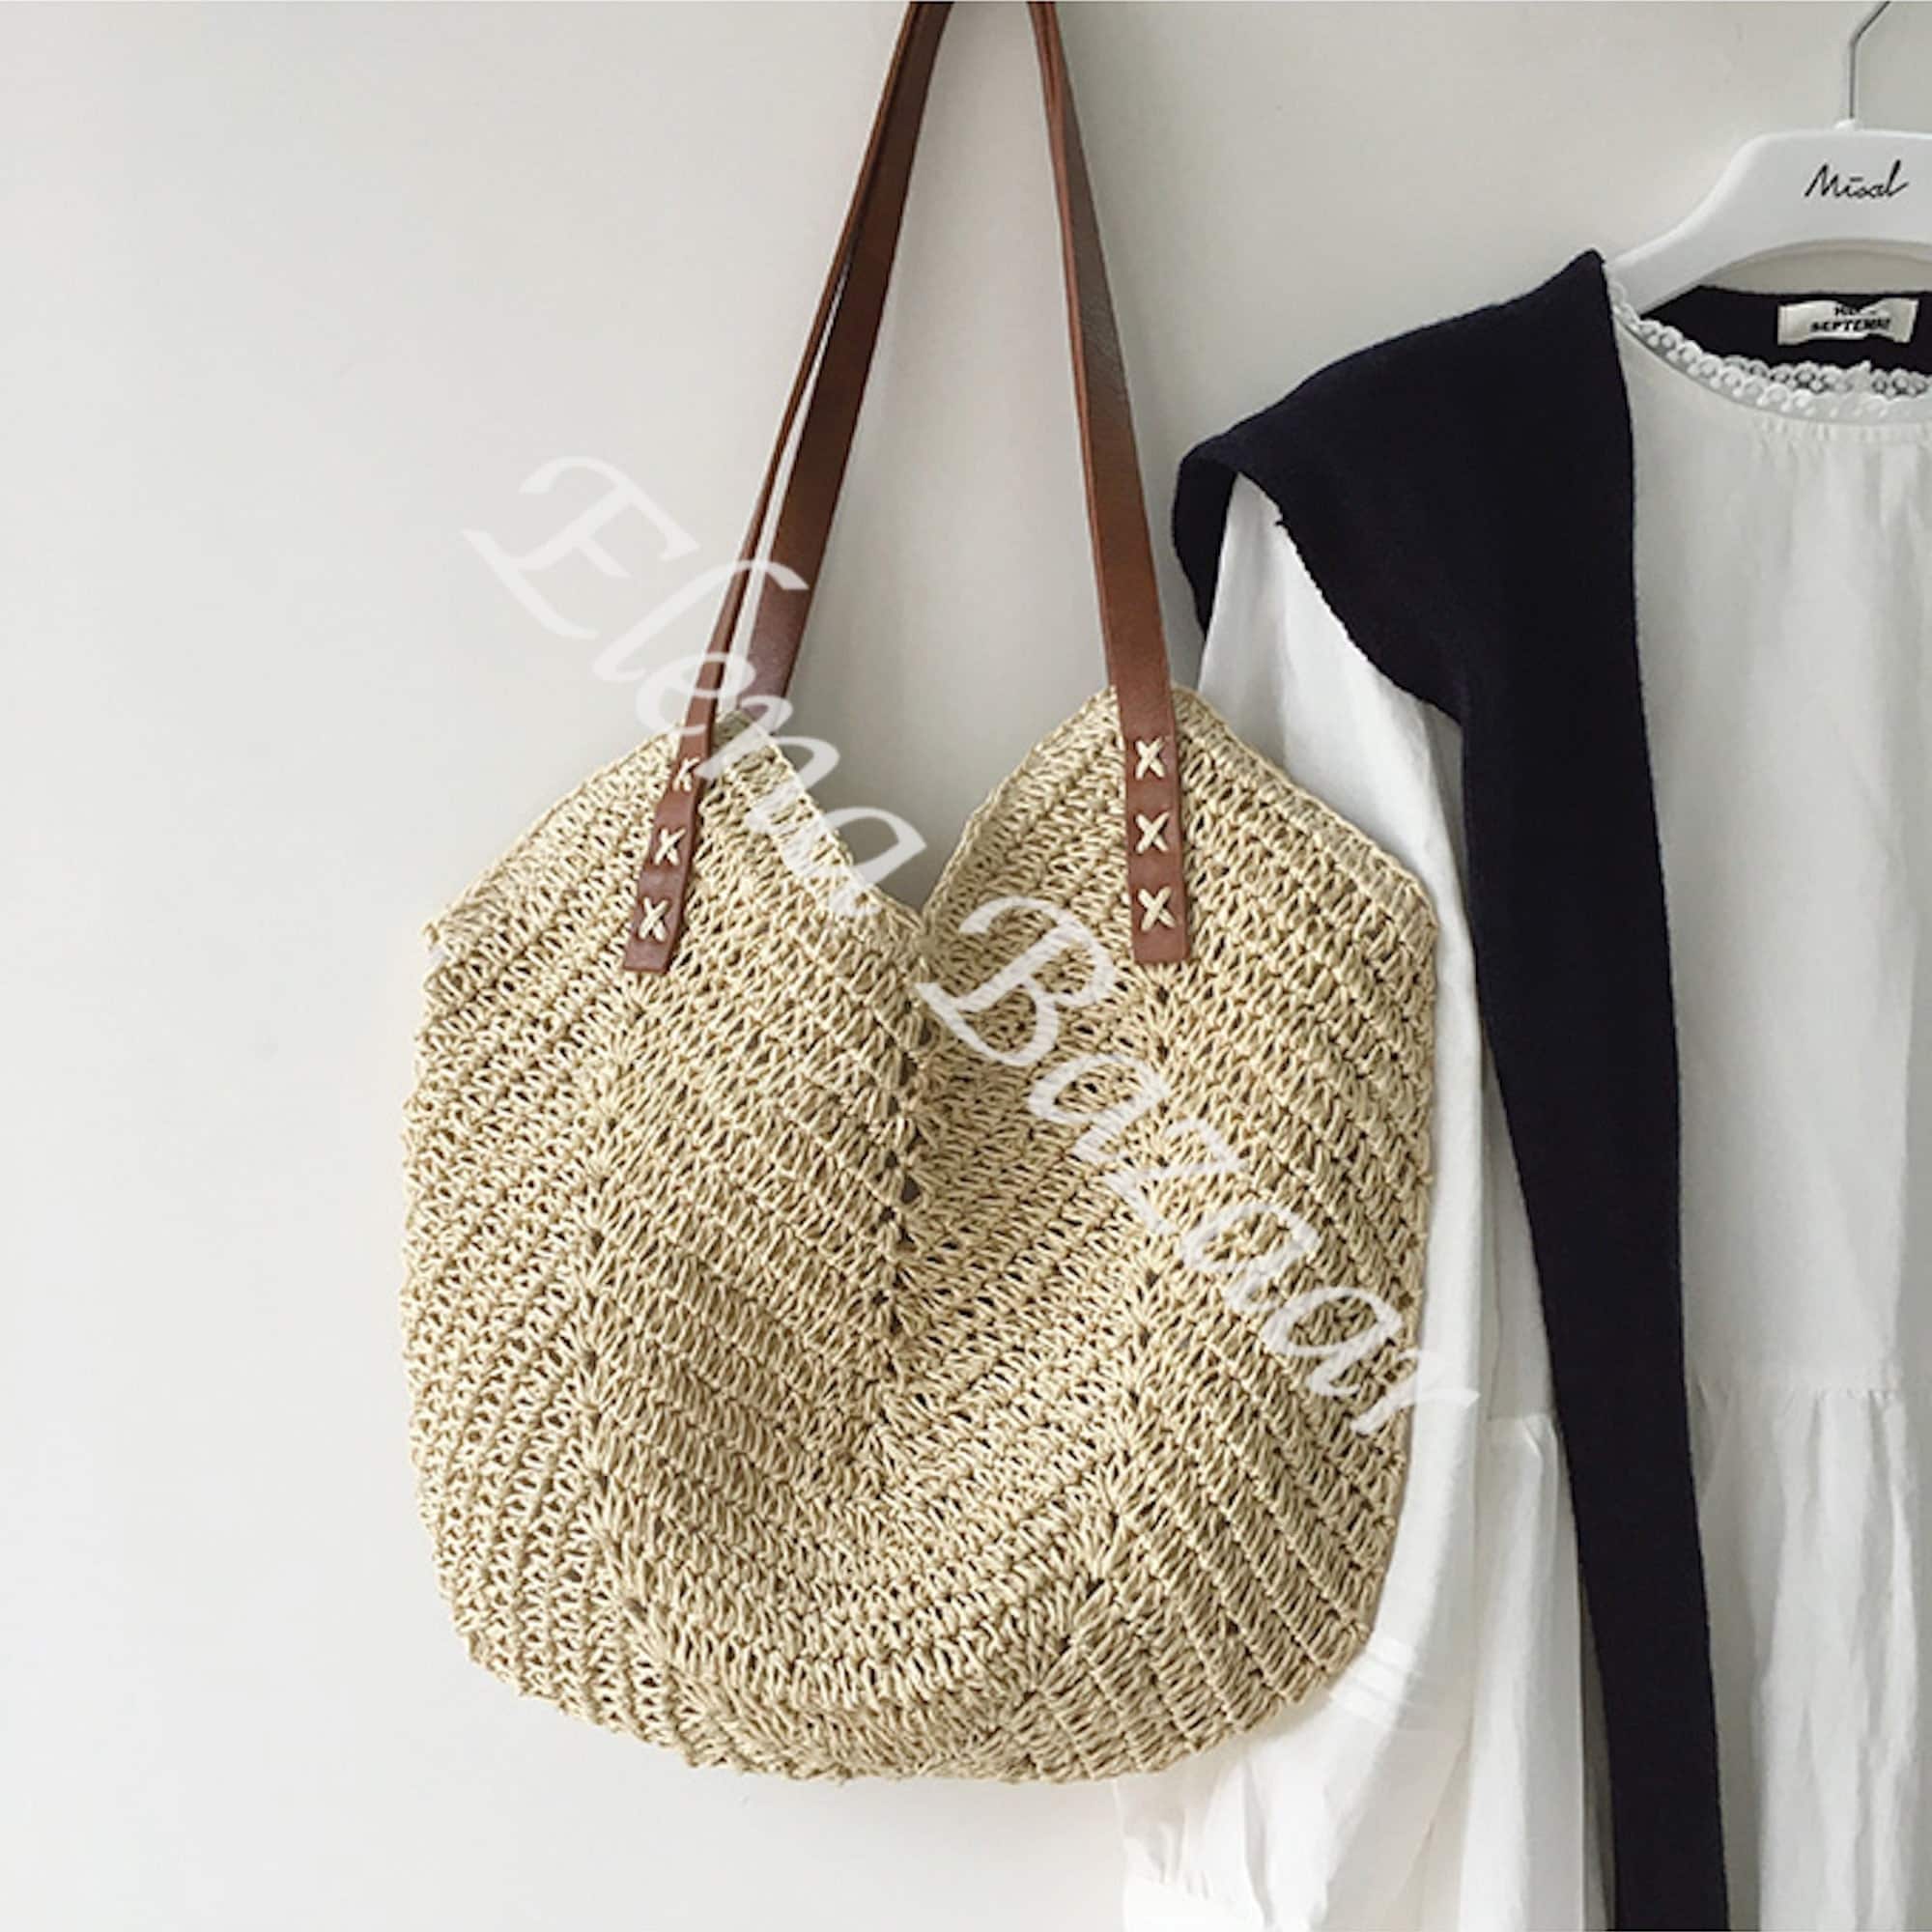 Elena Handbags Large Straw Woven Tote Bag with Leather Straps White